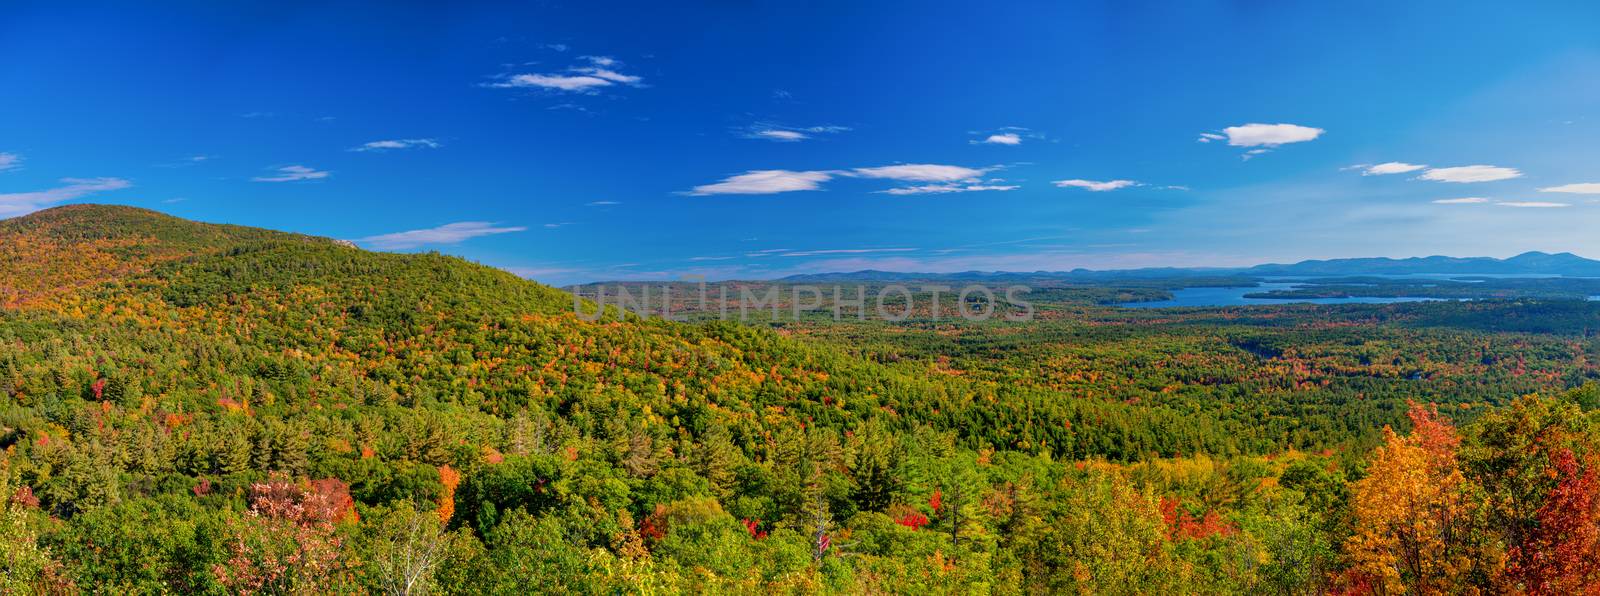 Panoramic aerial view of beautiful New Hampshire foliage mountai by jovannig